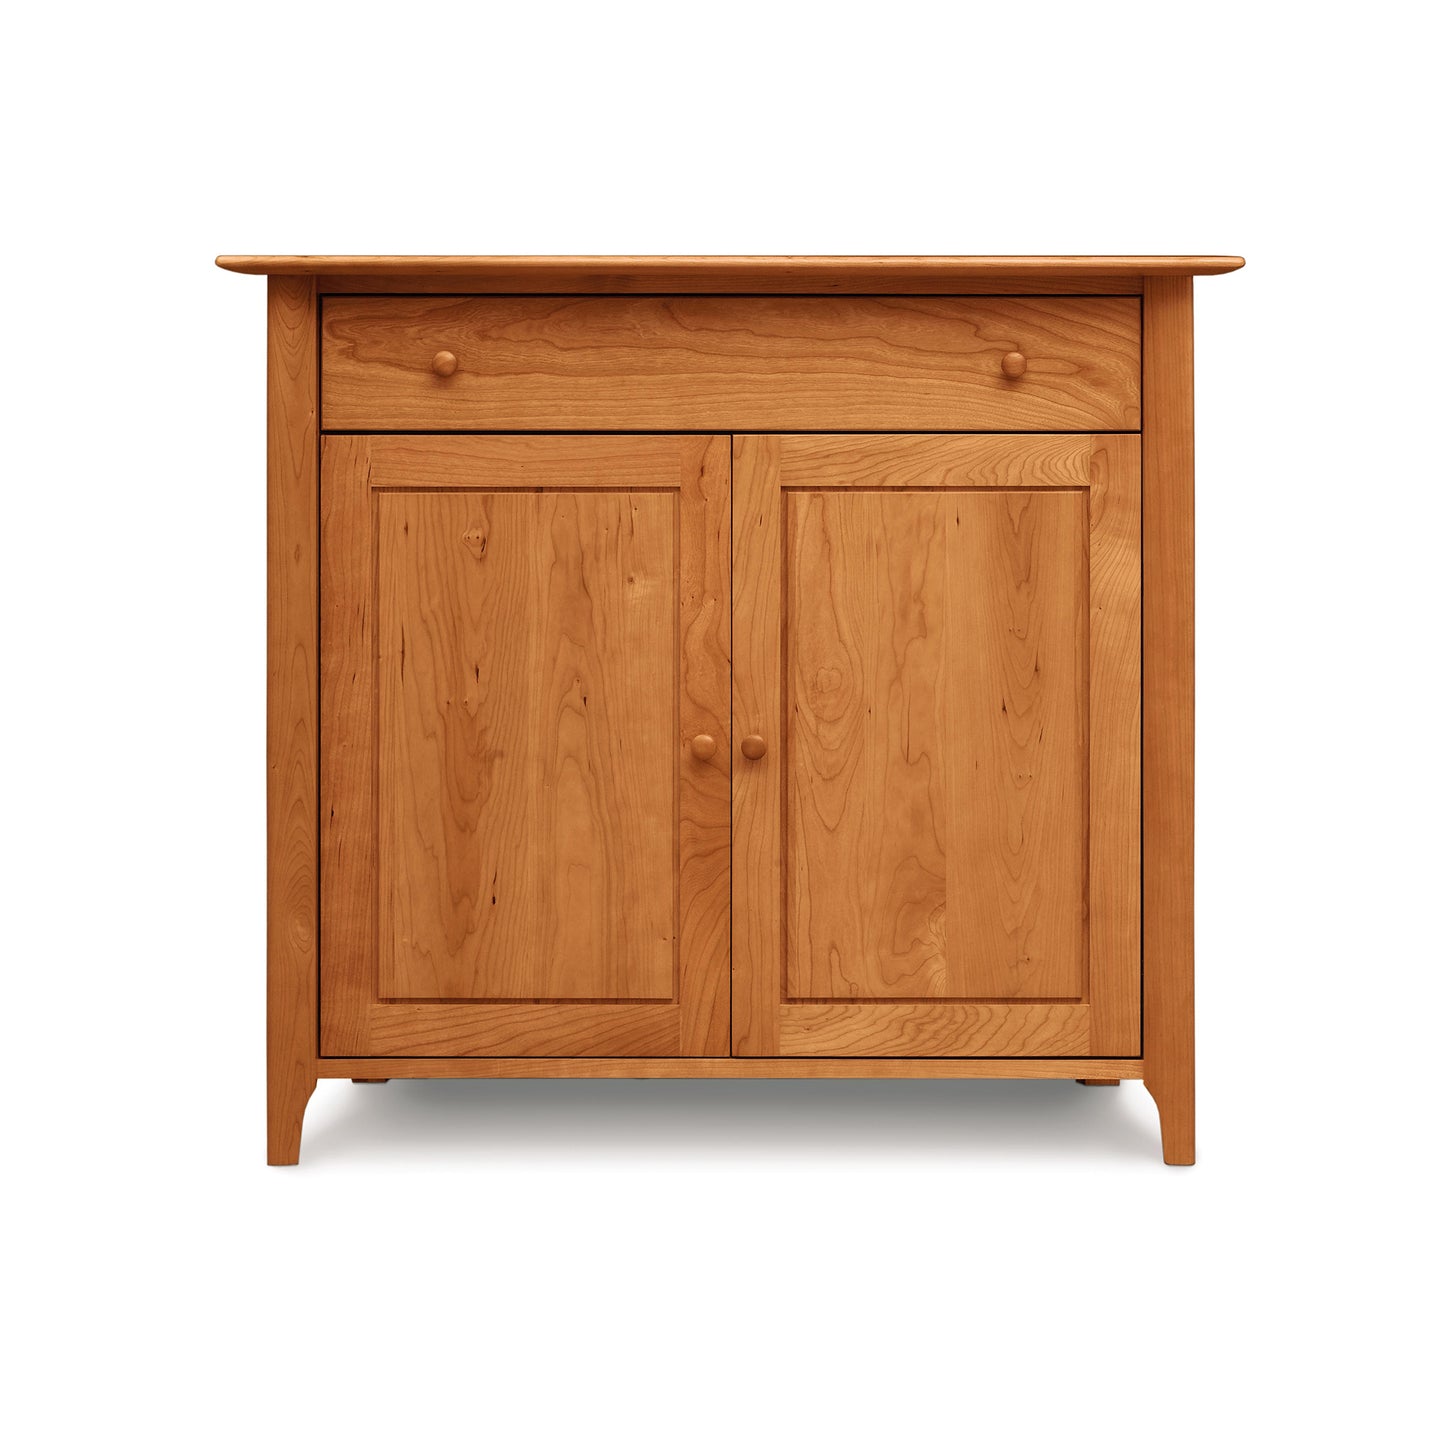 Solid wood cabinet with two doors and a single drawer, set against a white background.Copeland Furniture's Sarah 1-Drawer, 2-Door Buffet